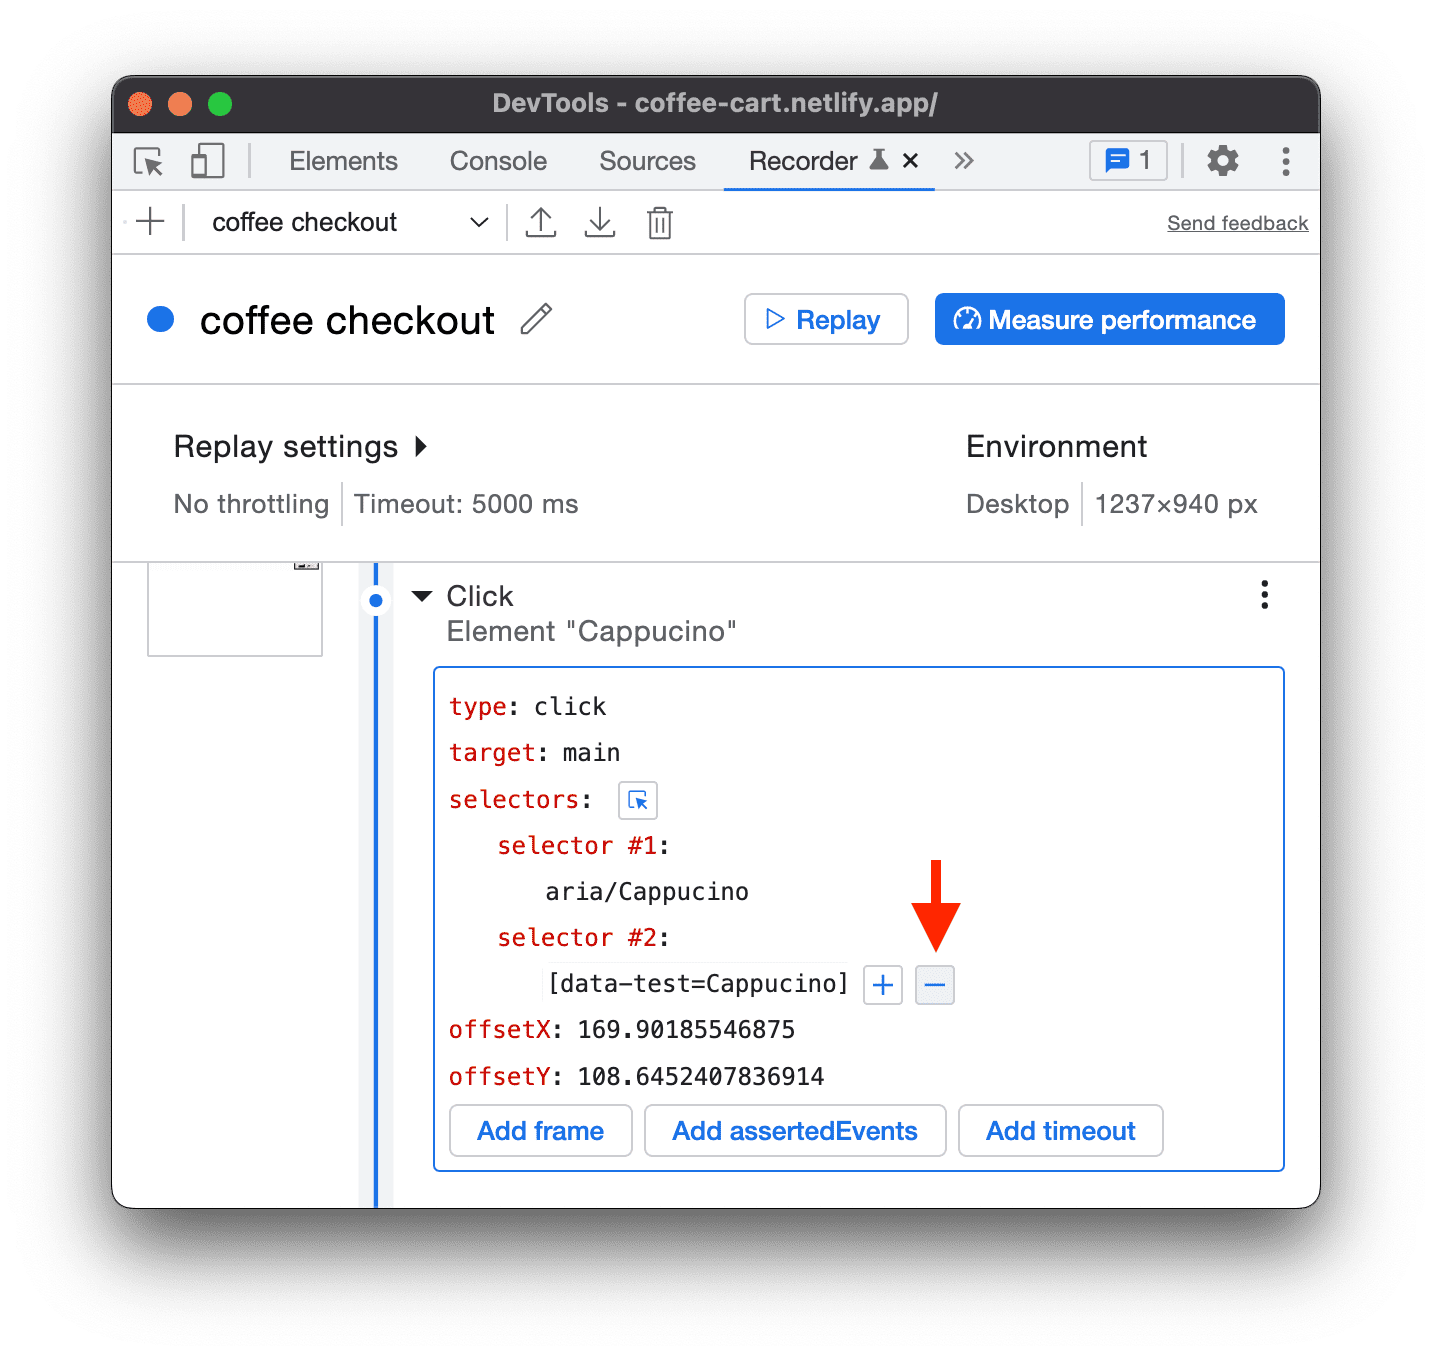 The DevTools recorder panel shows an option to remove a selector.